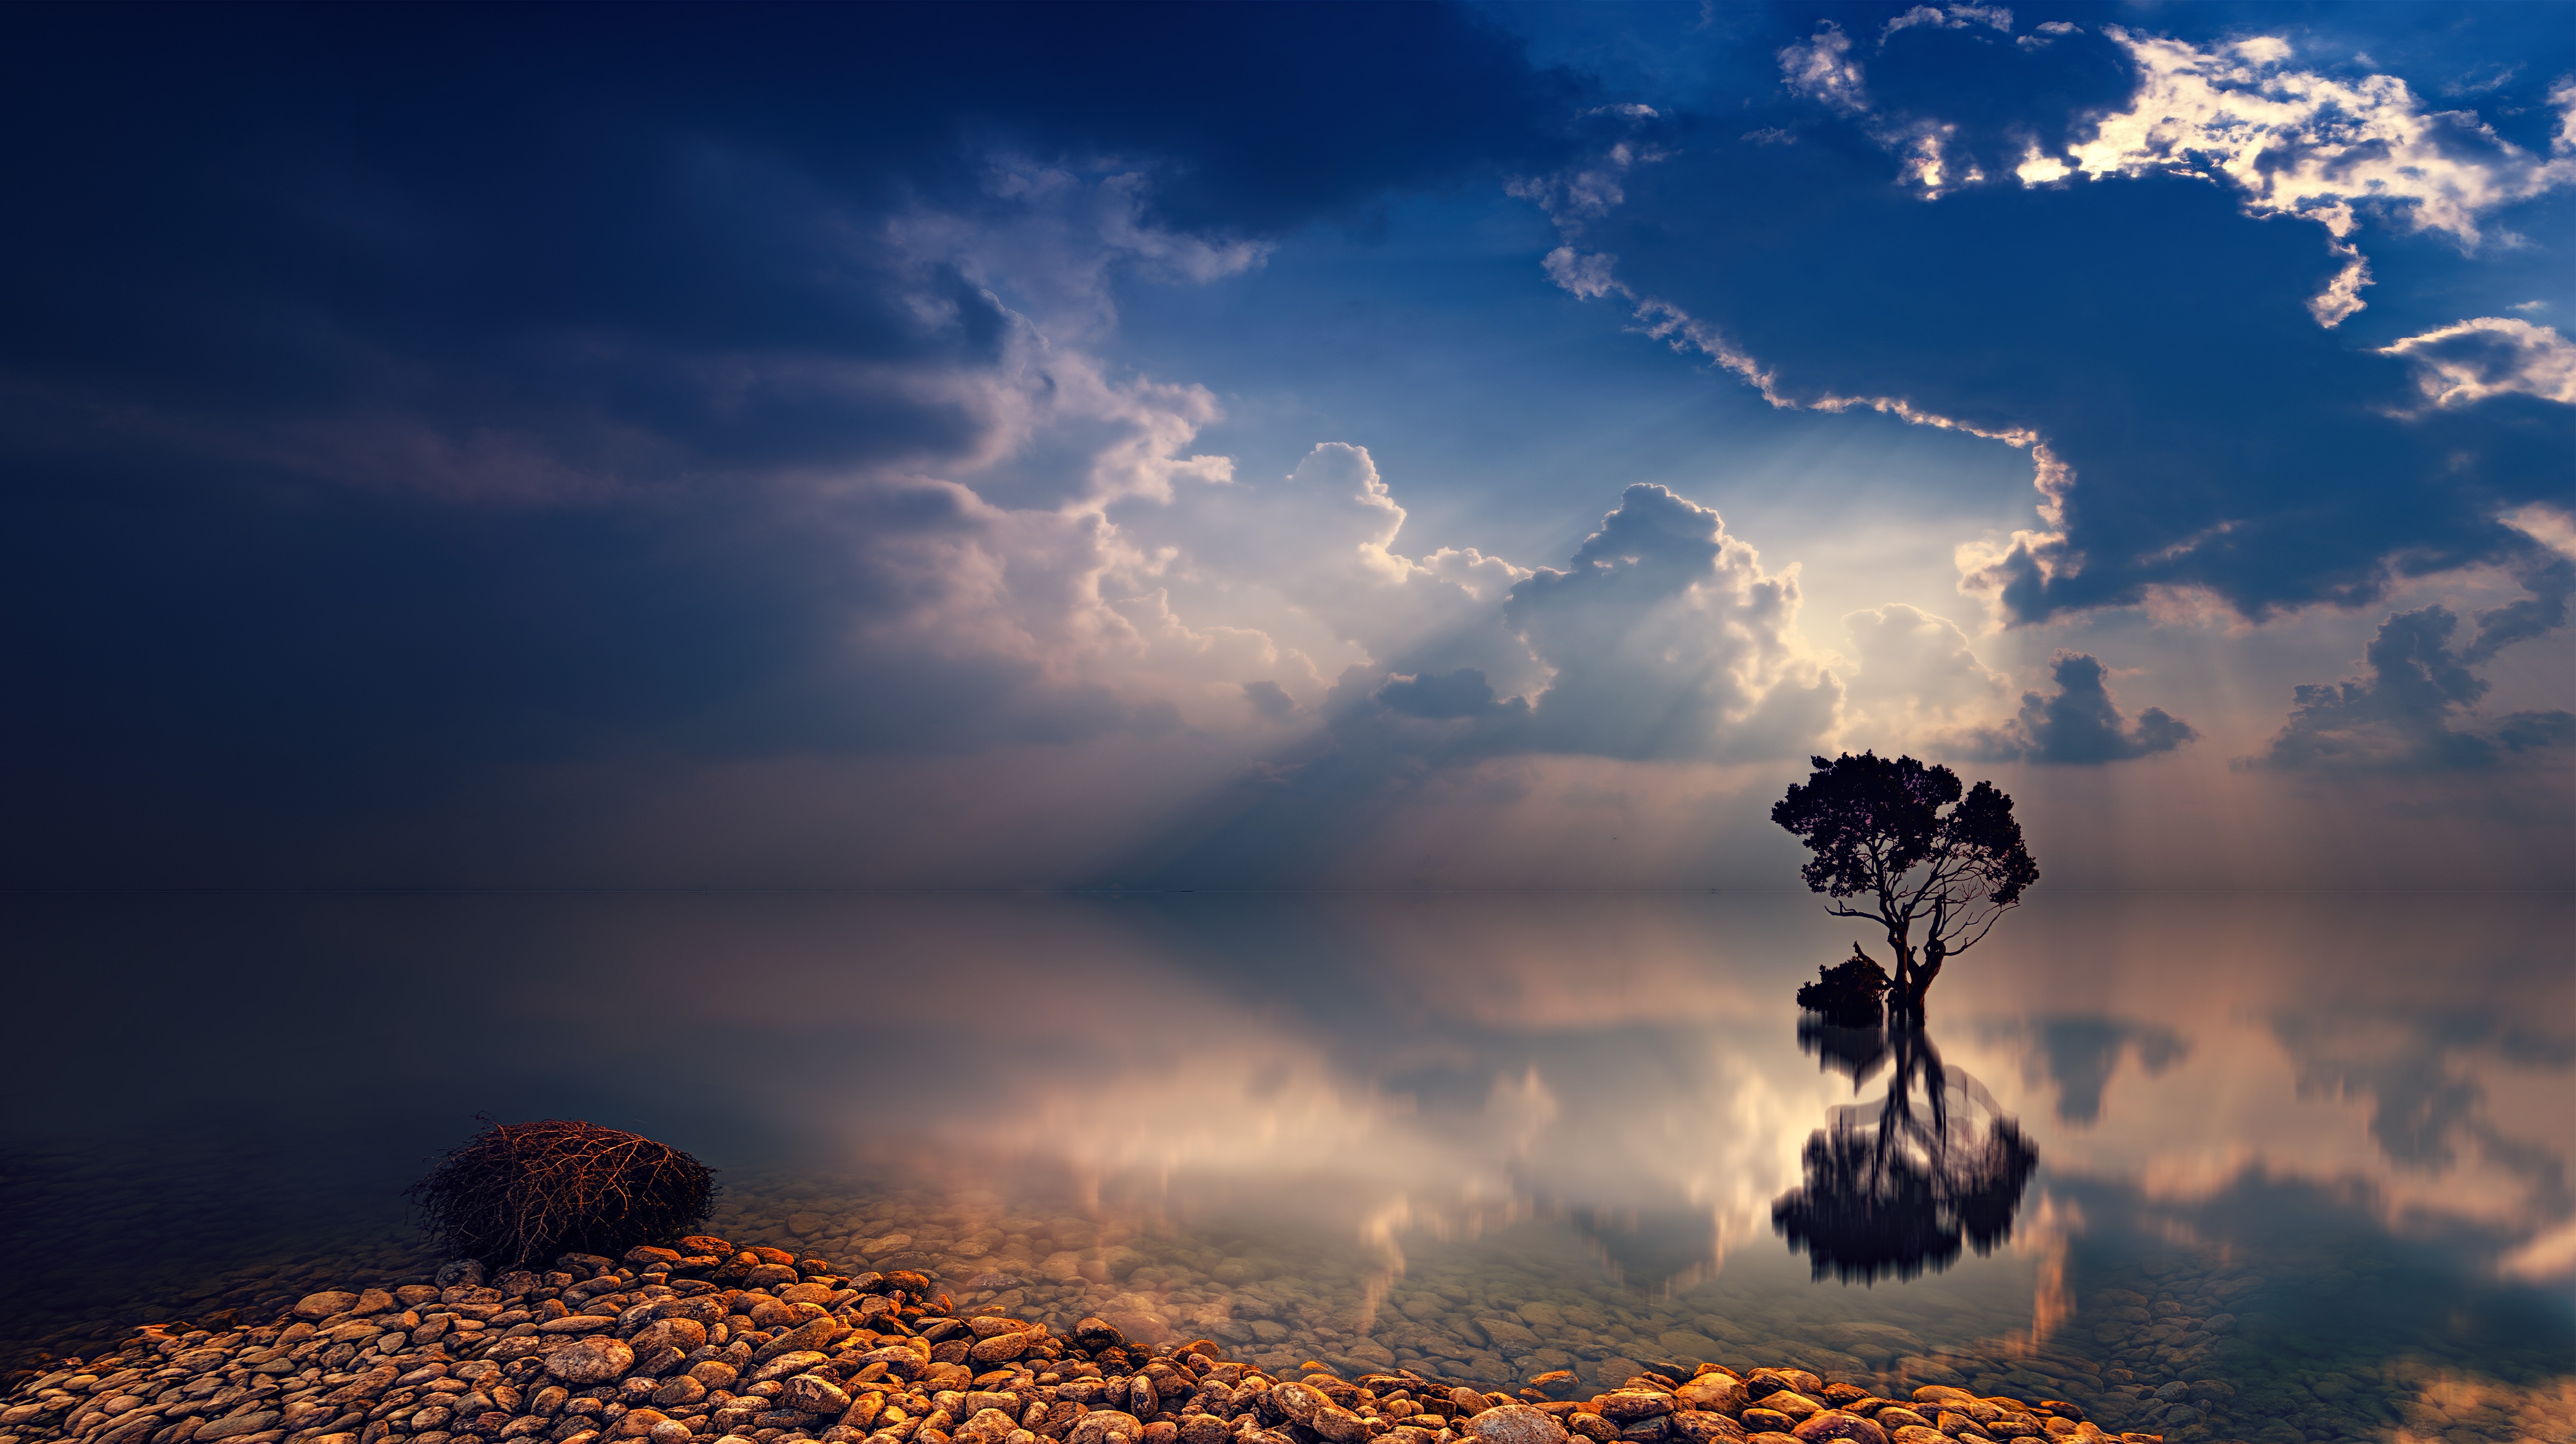 nature, trees, stone, earth, tree, cloud, lonely tree, ocean, reflection, sunbeam, twilight wallpaper for mobile